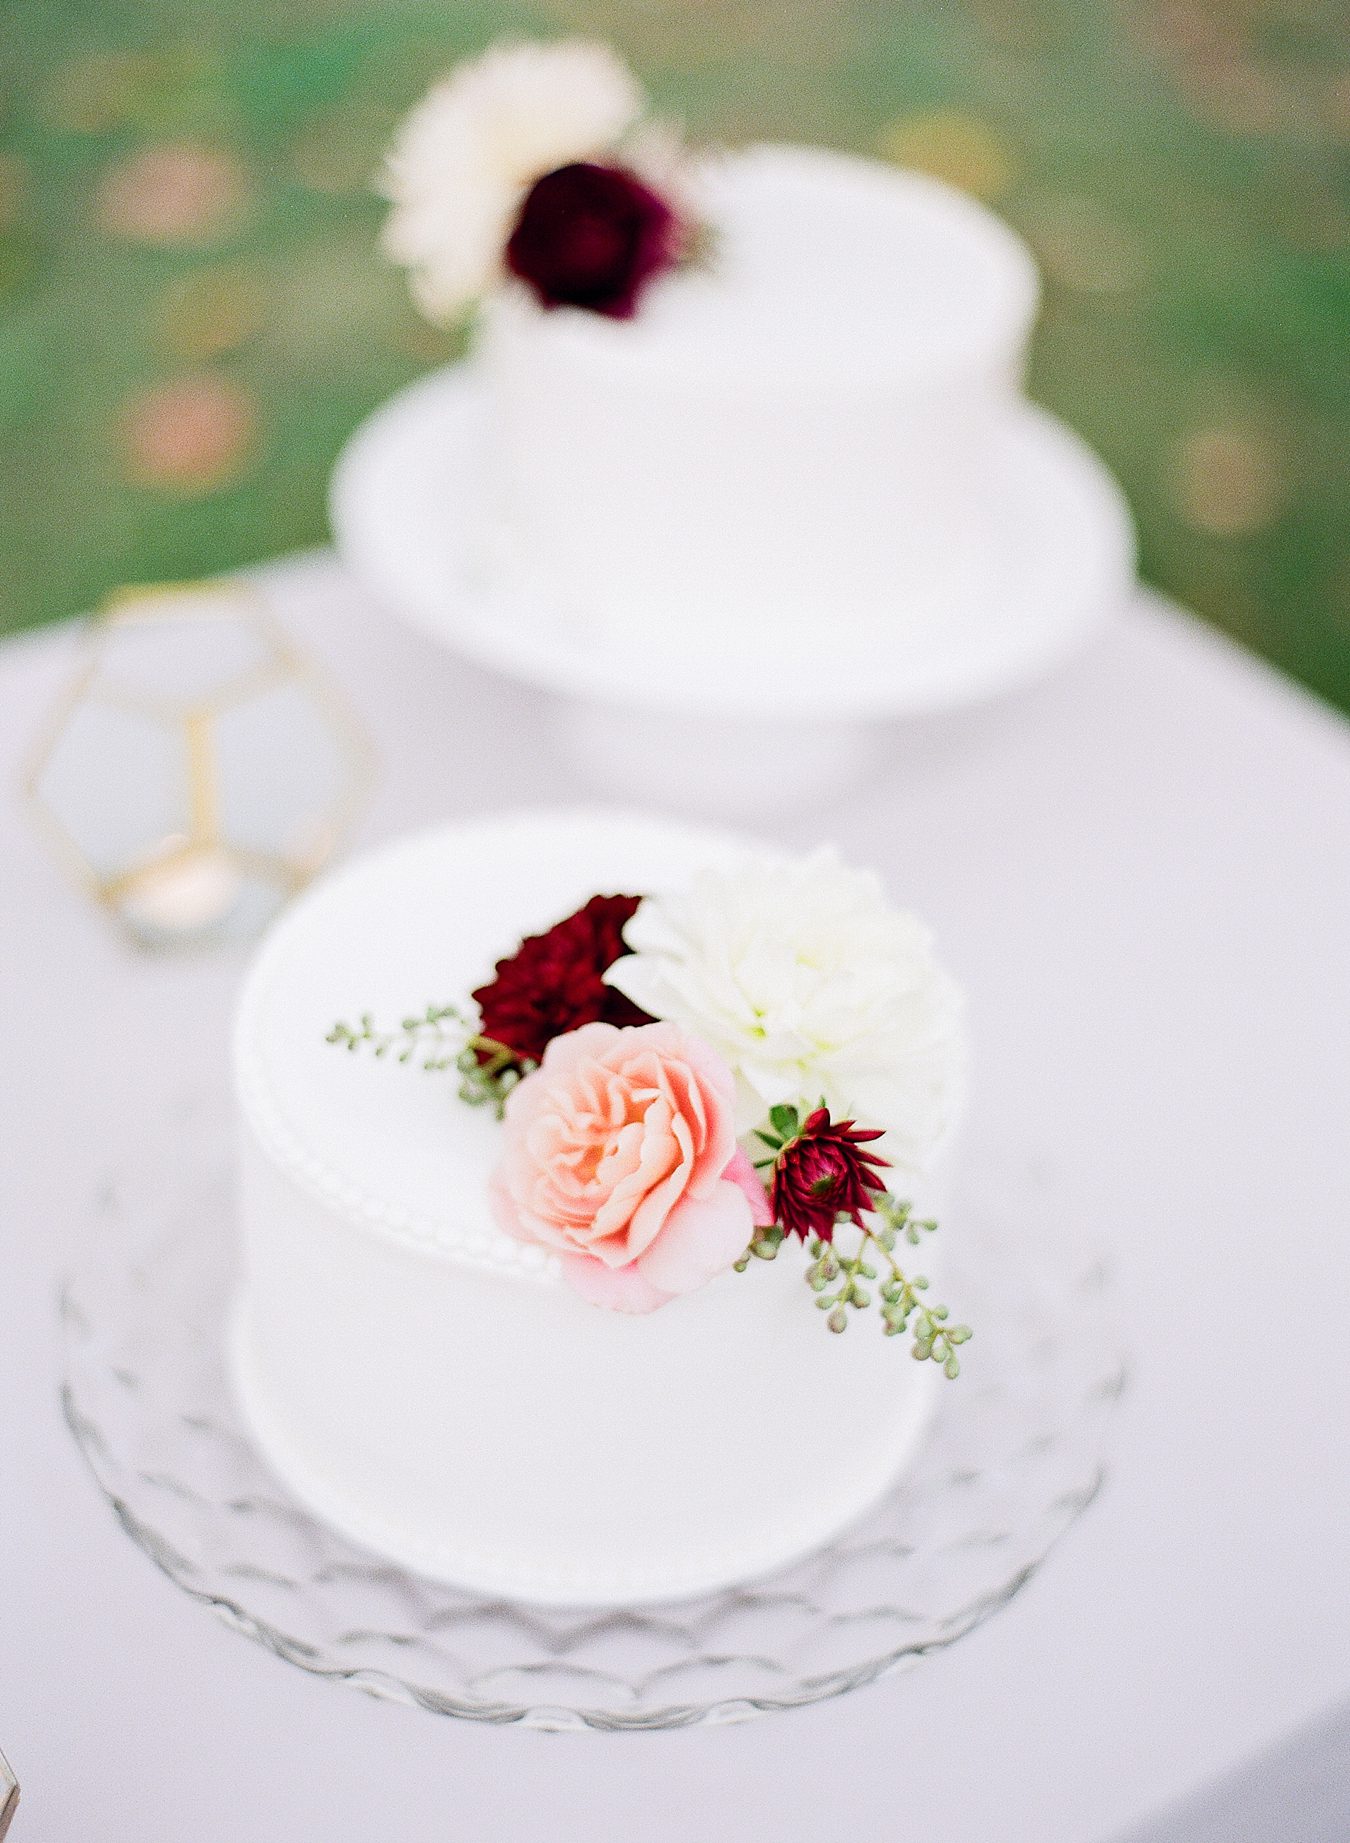 Aunt B's Cakes | Cory Weber Photography | Sincerely, Ginger Event Design & Production | BLOOM Floral Design